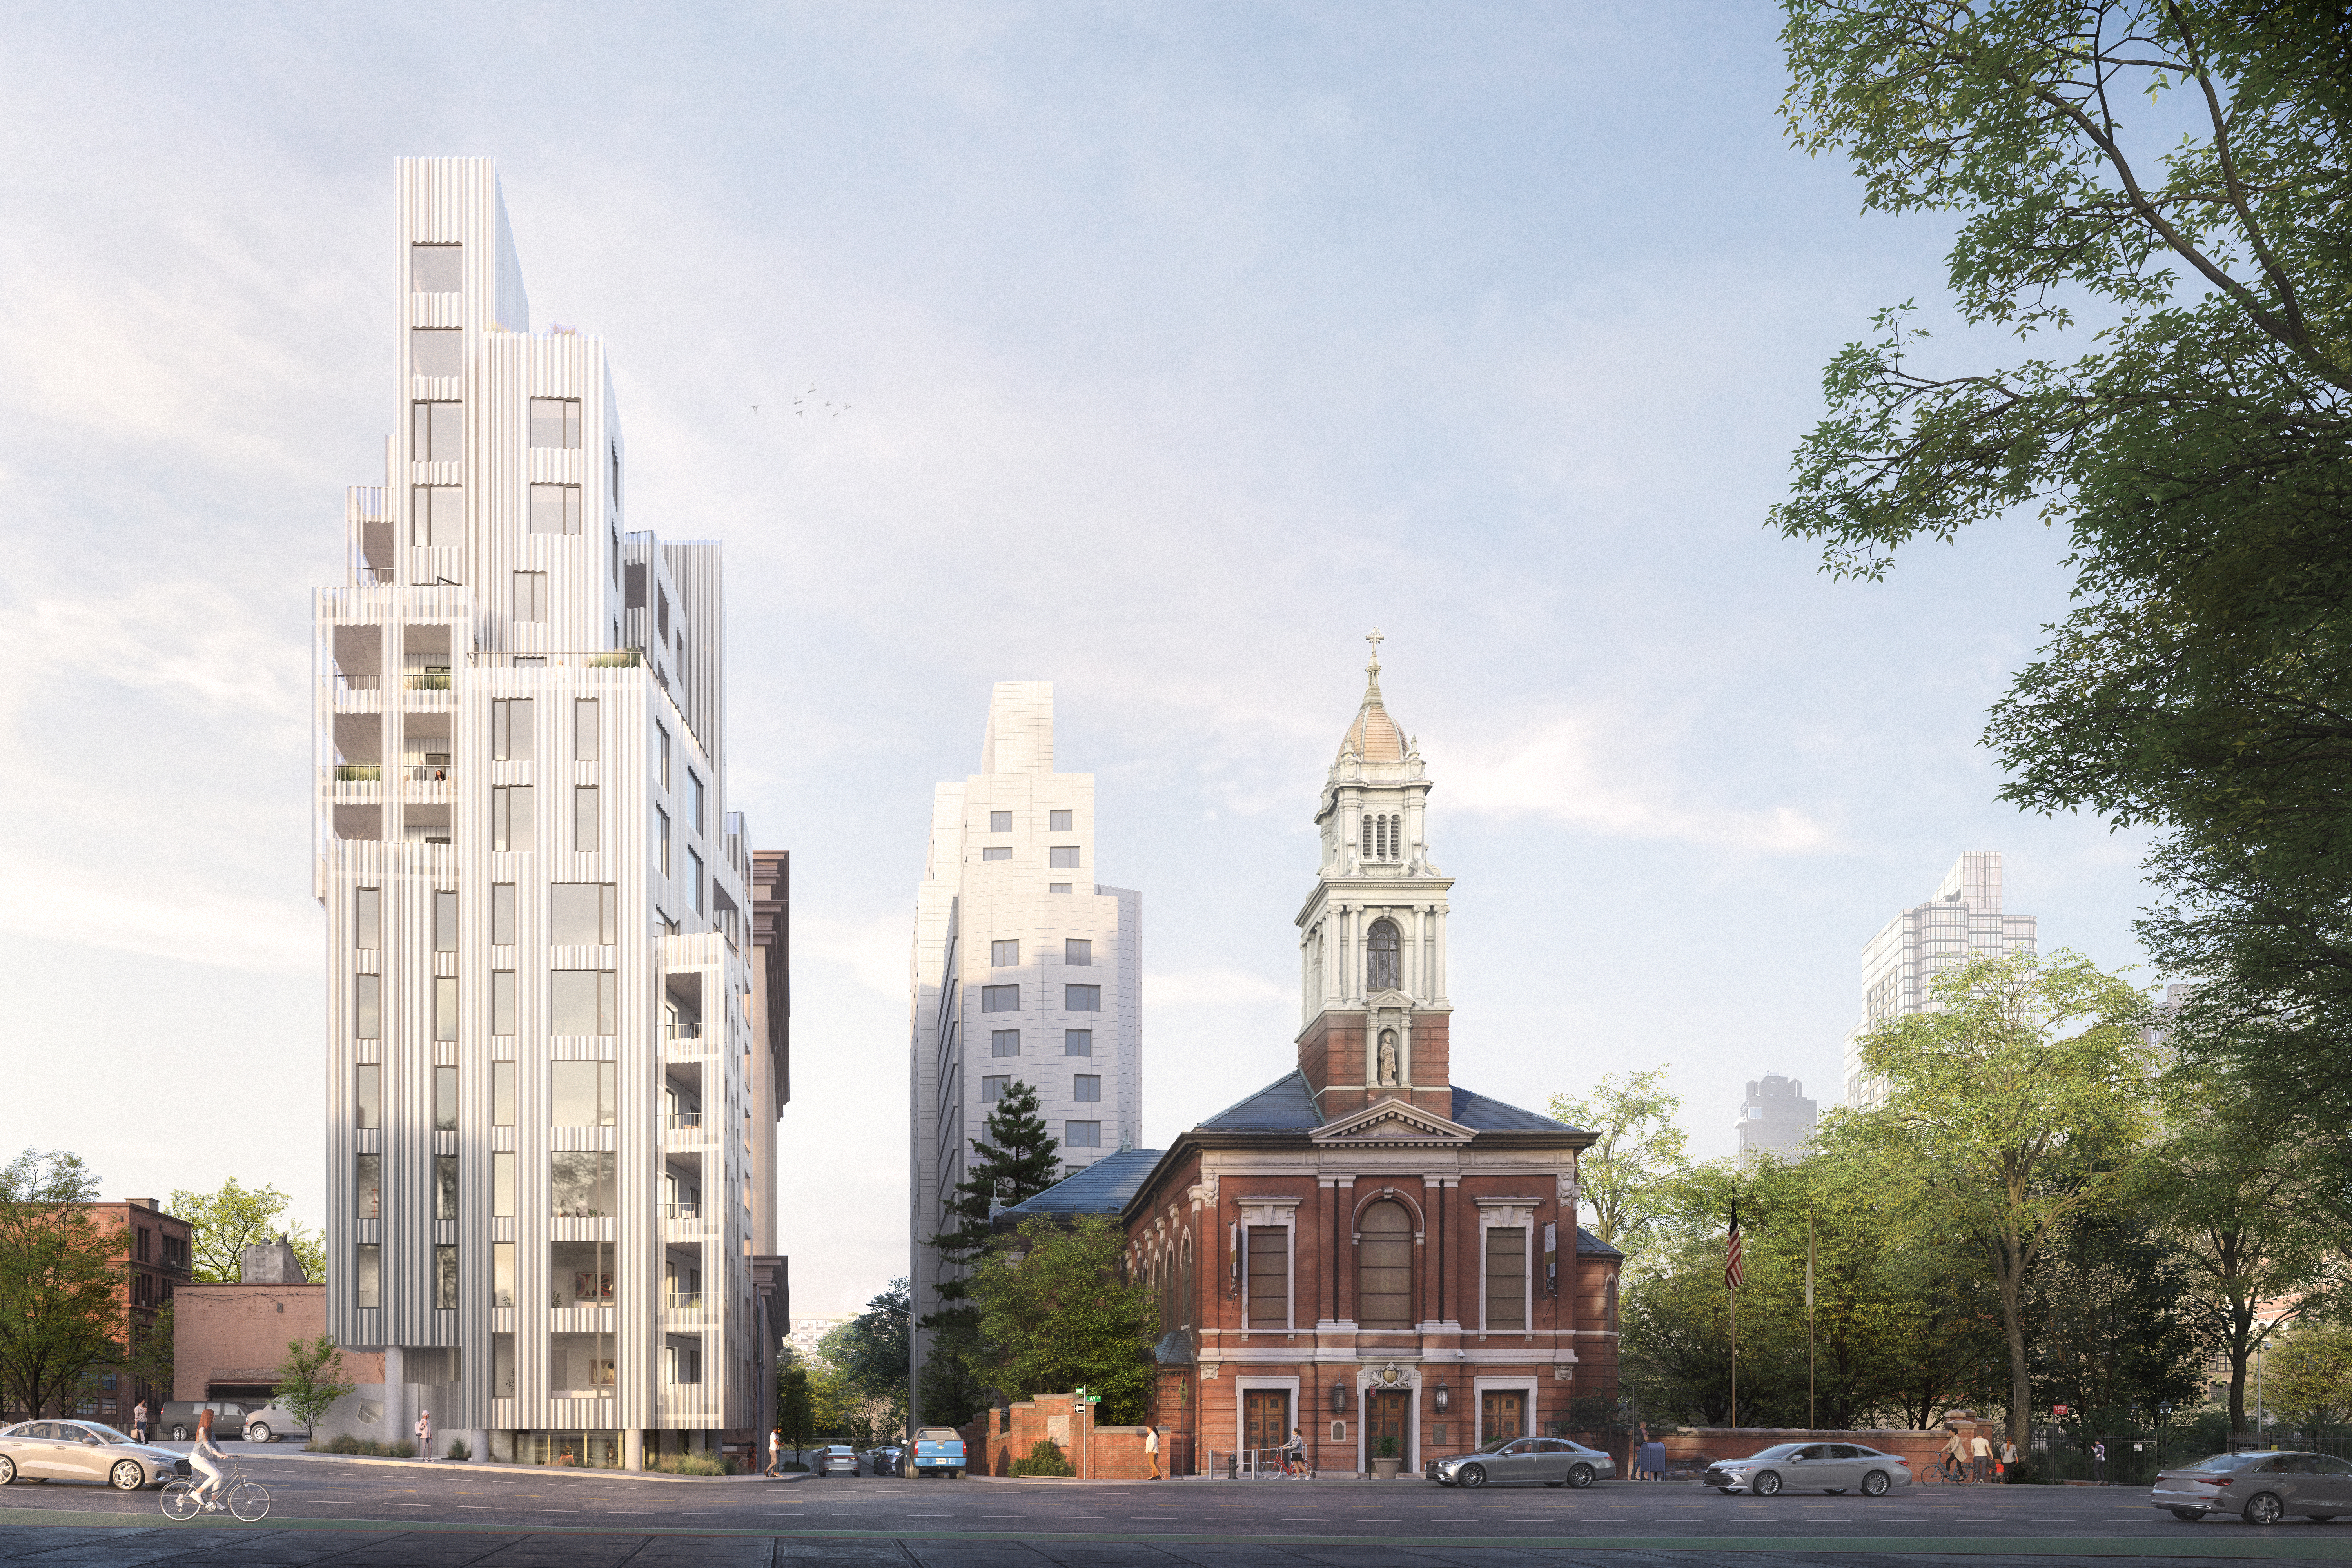 Exterior rendering of 9 Chapel Street next to a chapel from street view